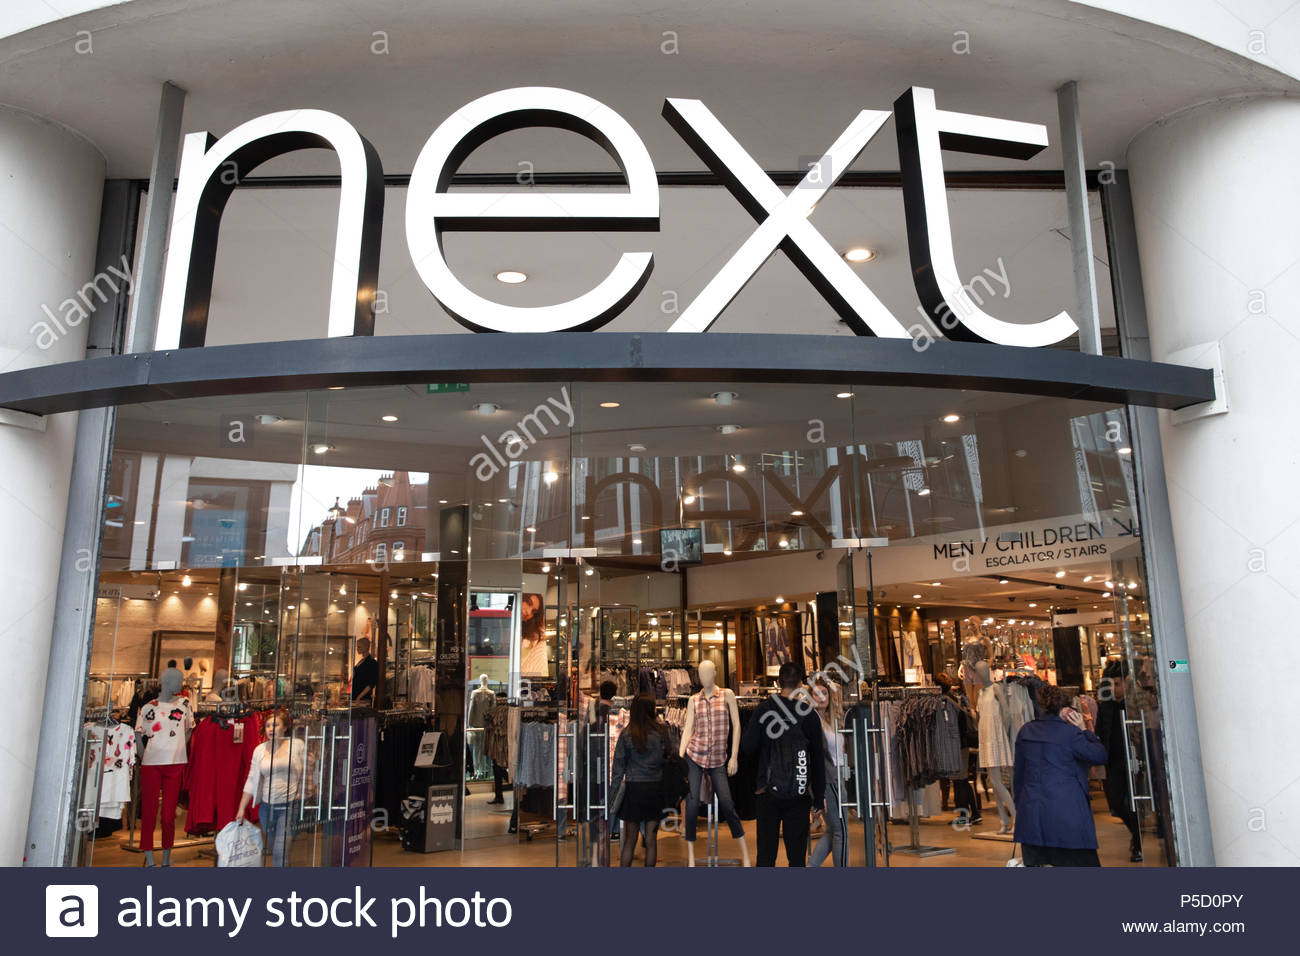 Next deal keeps Gap brand alive in the UK